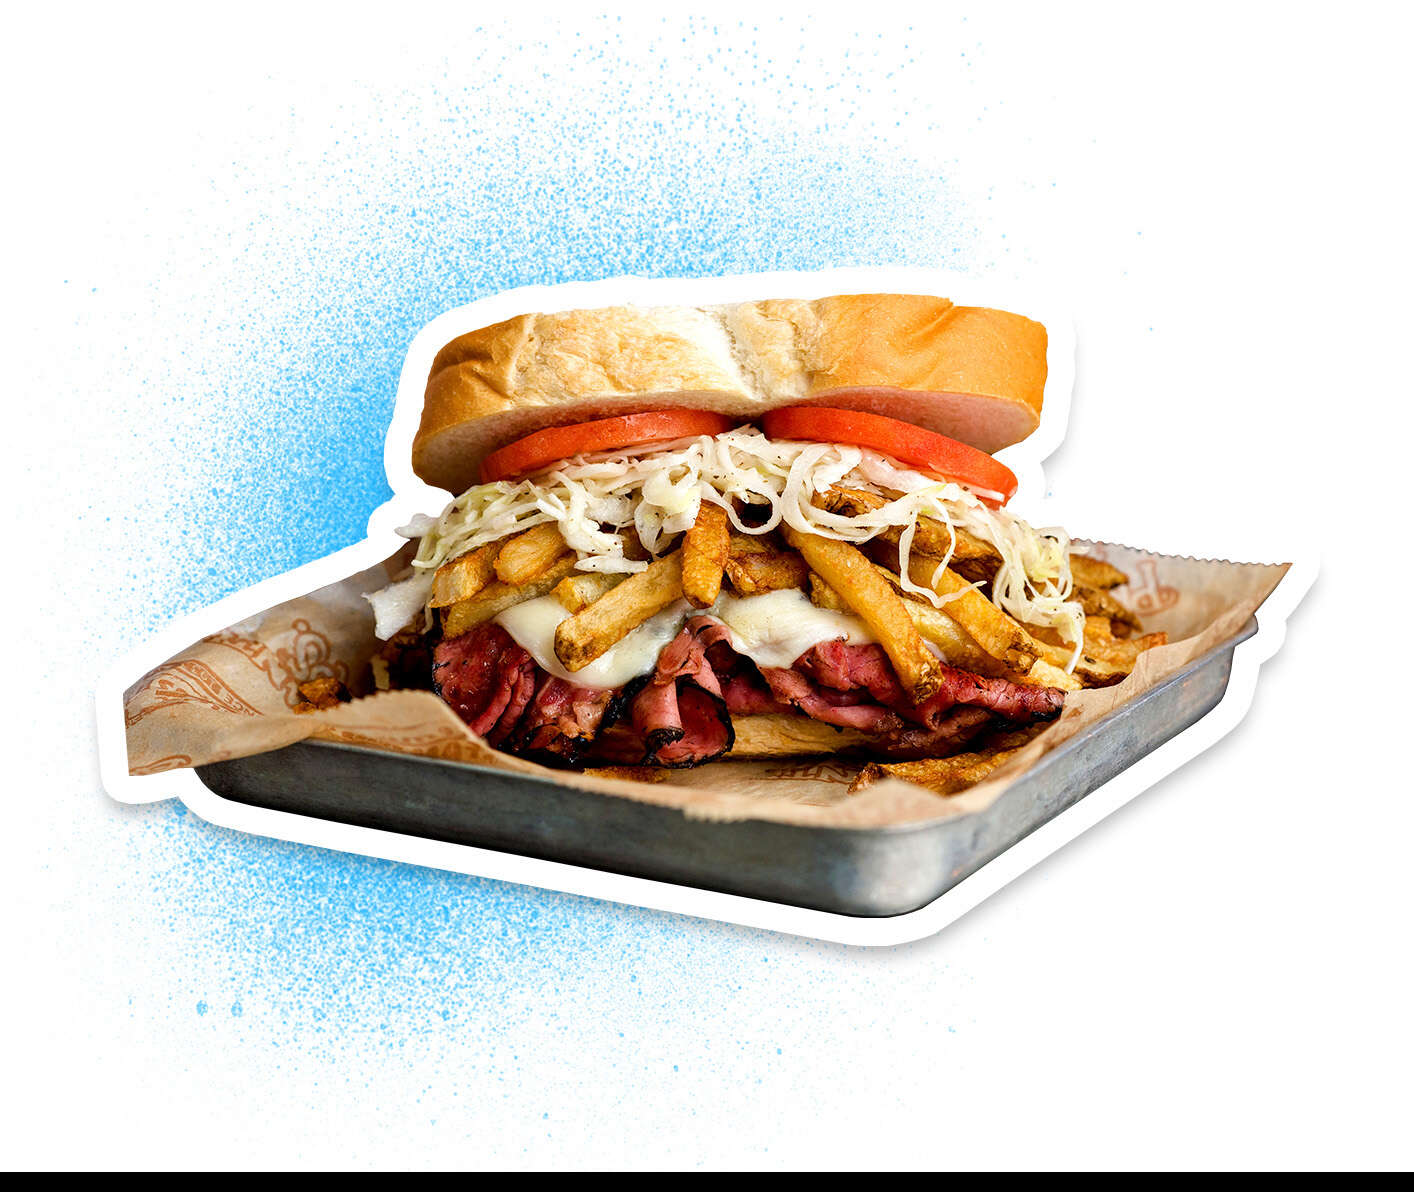 Primanti Bros french fries in sandwiches